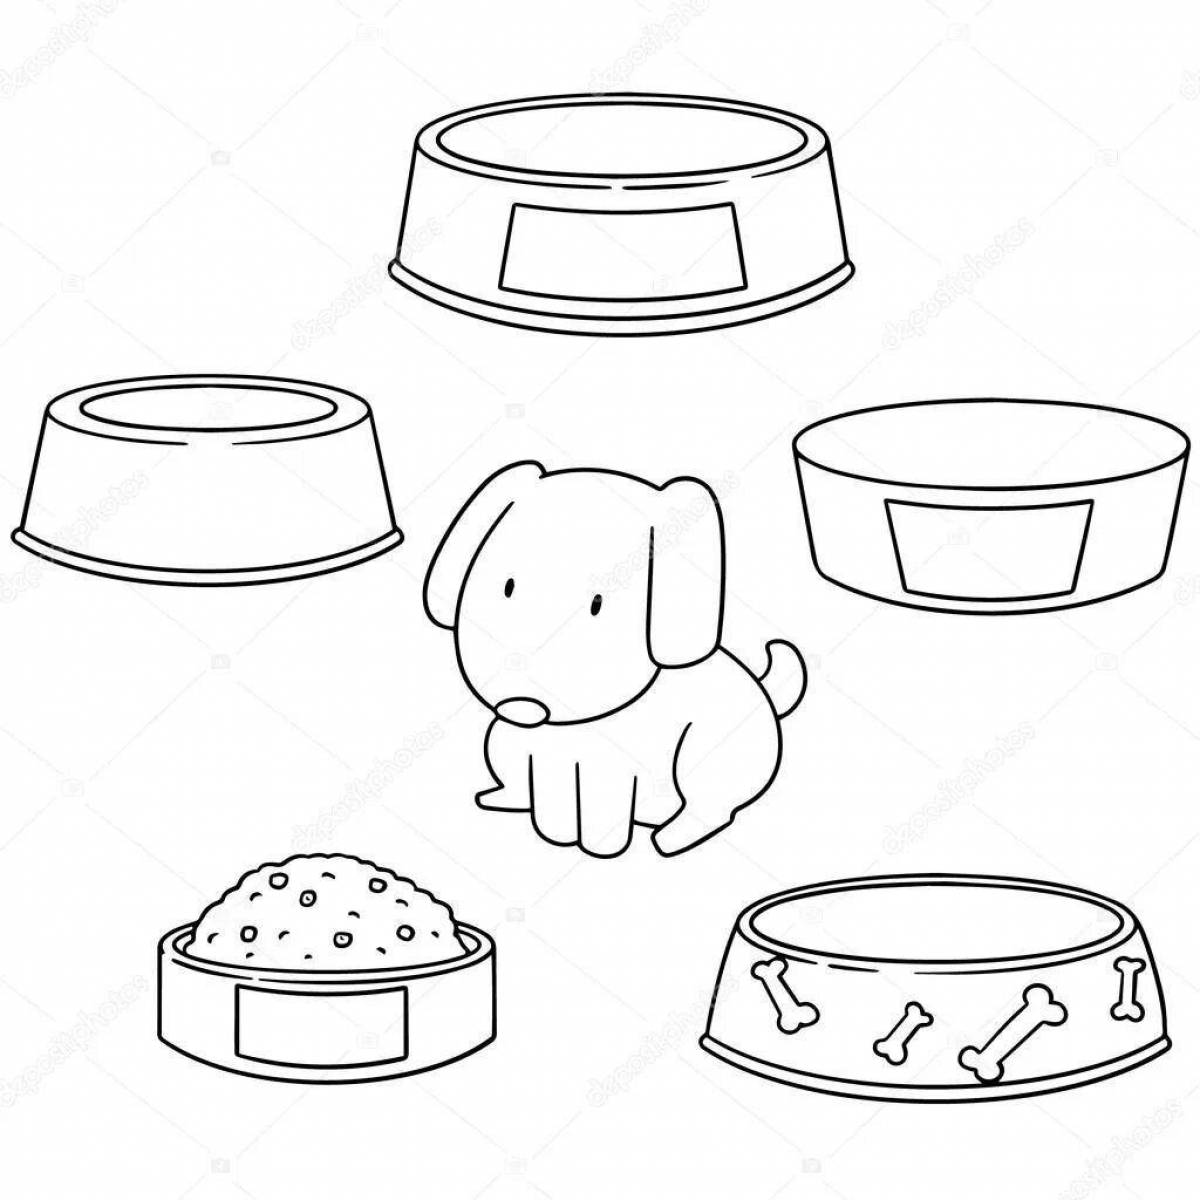 Glamorous cat food coloring page